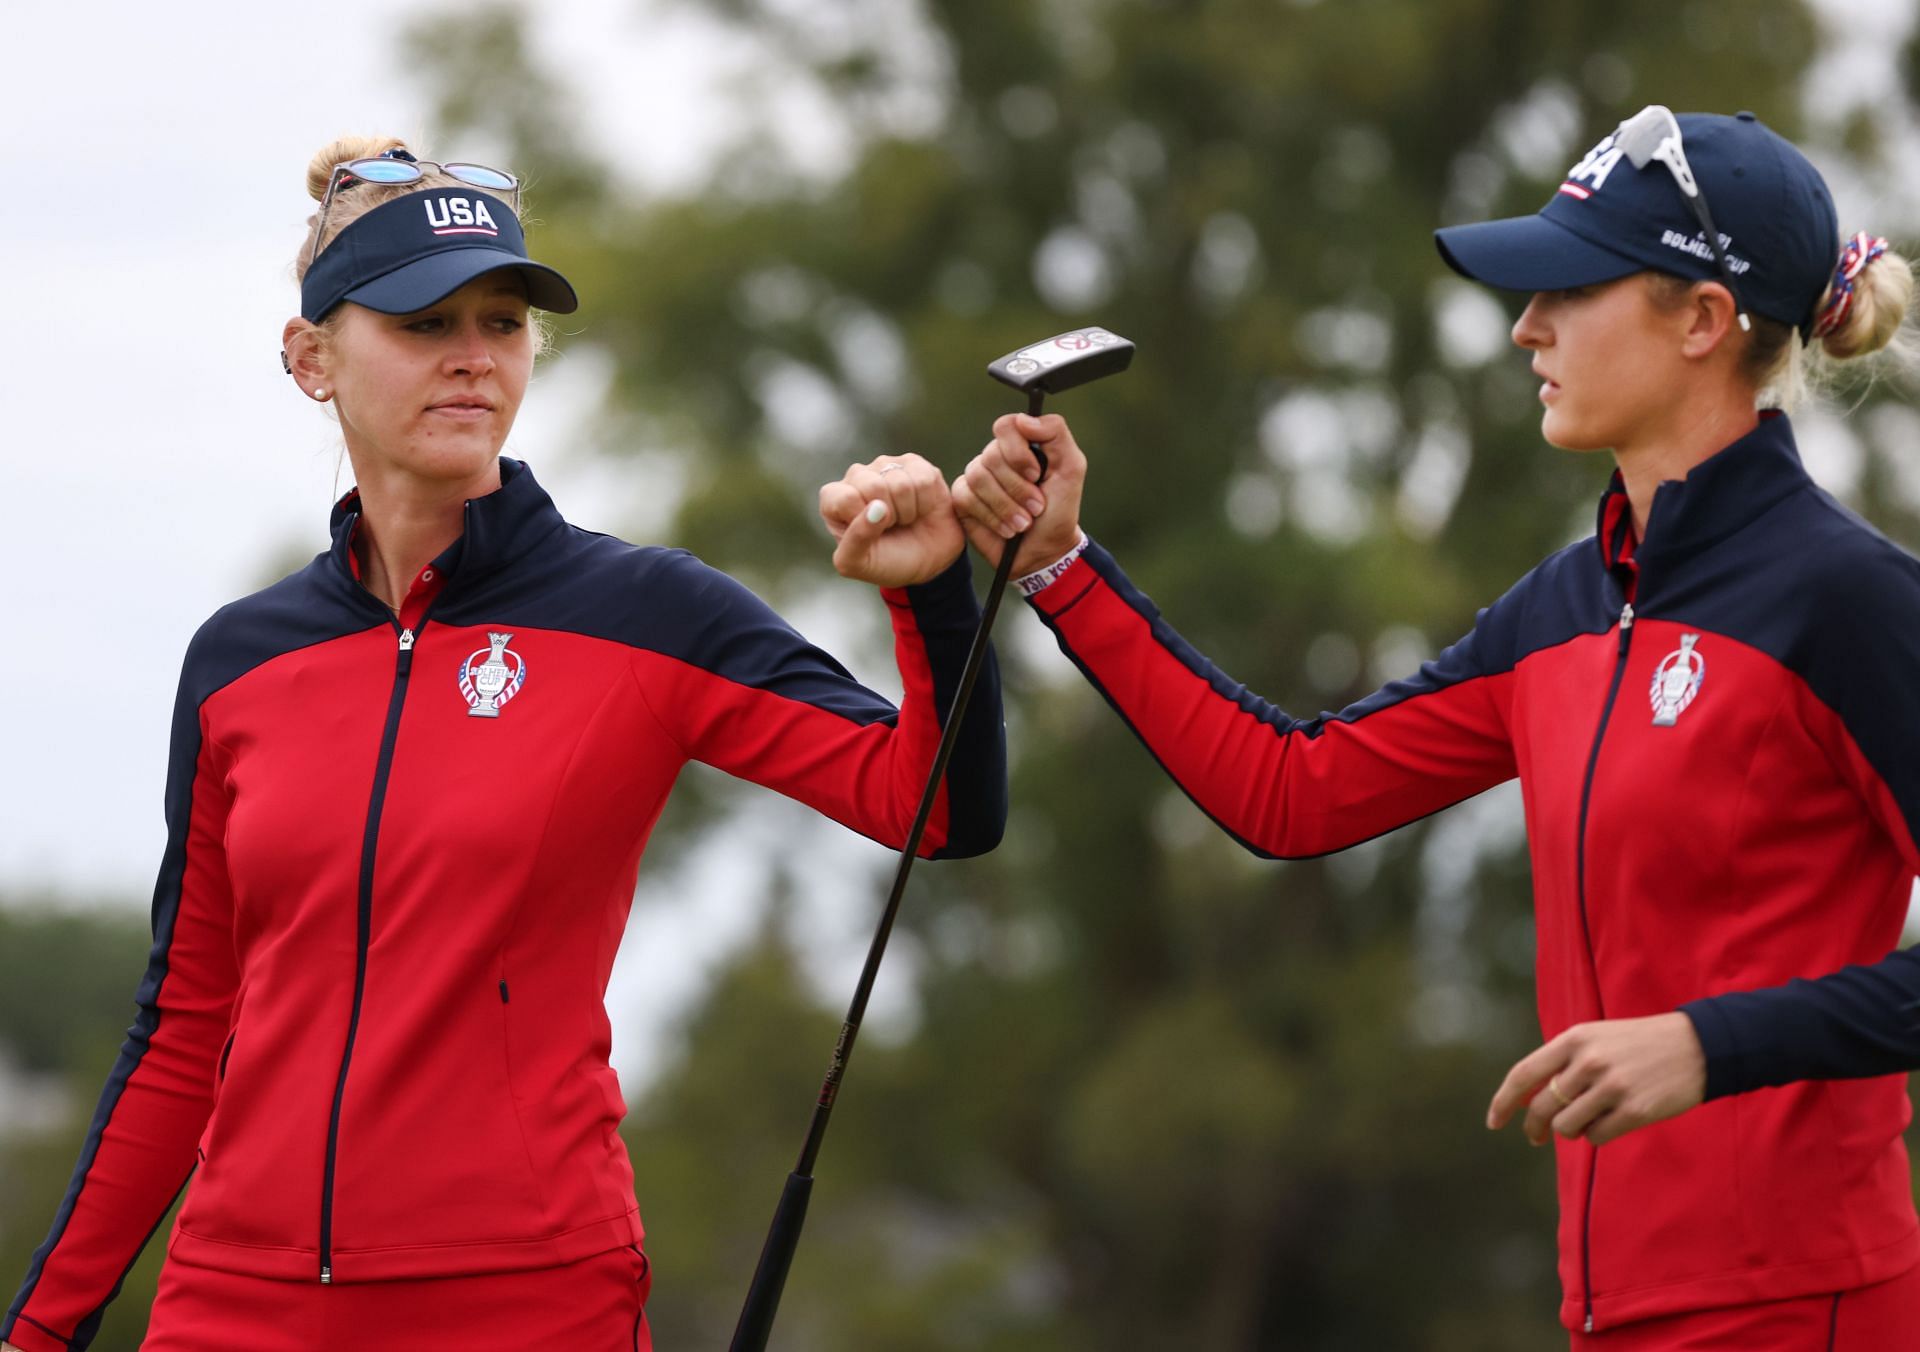 Jessica Korda and her sister Nelly Korda at the 2021 Solheim Cup (via Getty Images)